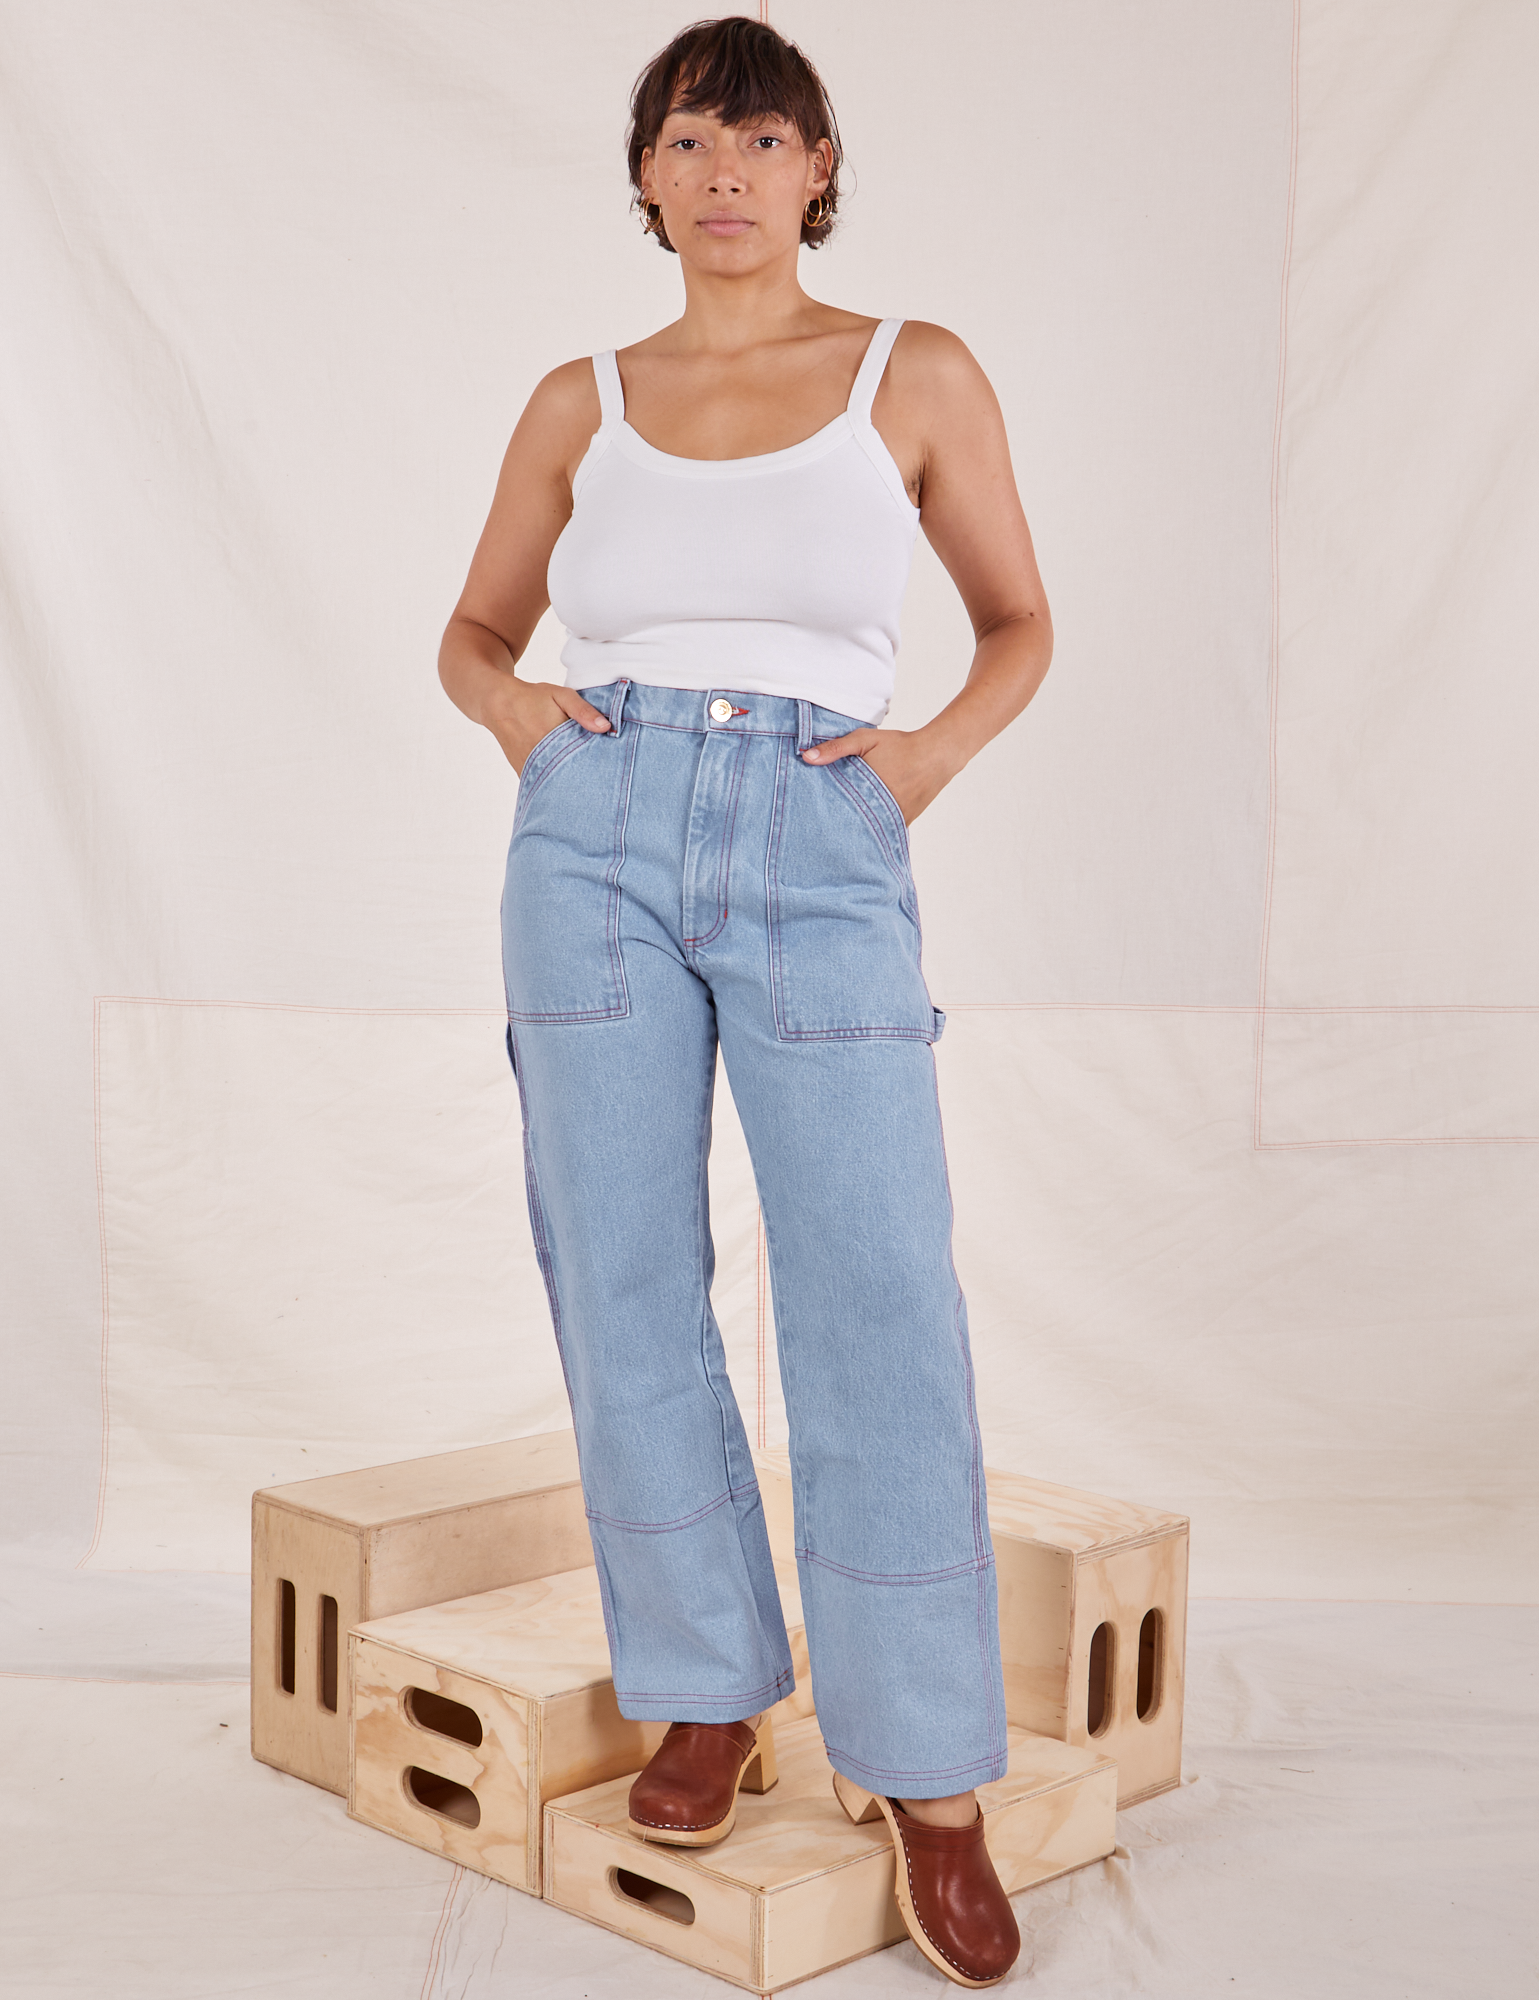 Tiara is 5&#39;4&quot; and wearing S Carpenter Jeans in Light Wash paired with Cropped Cami in vintage tee off-white